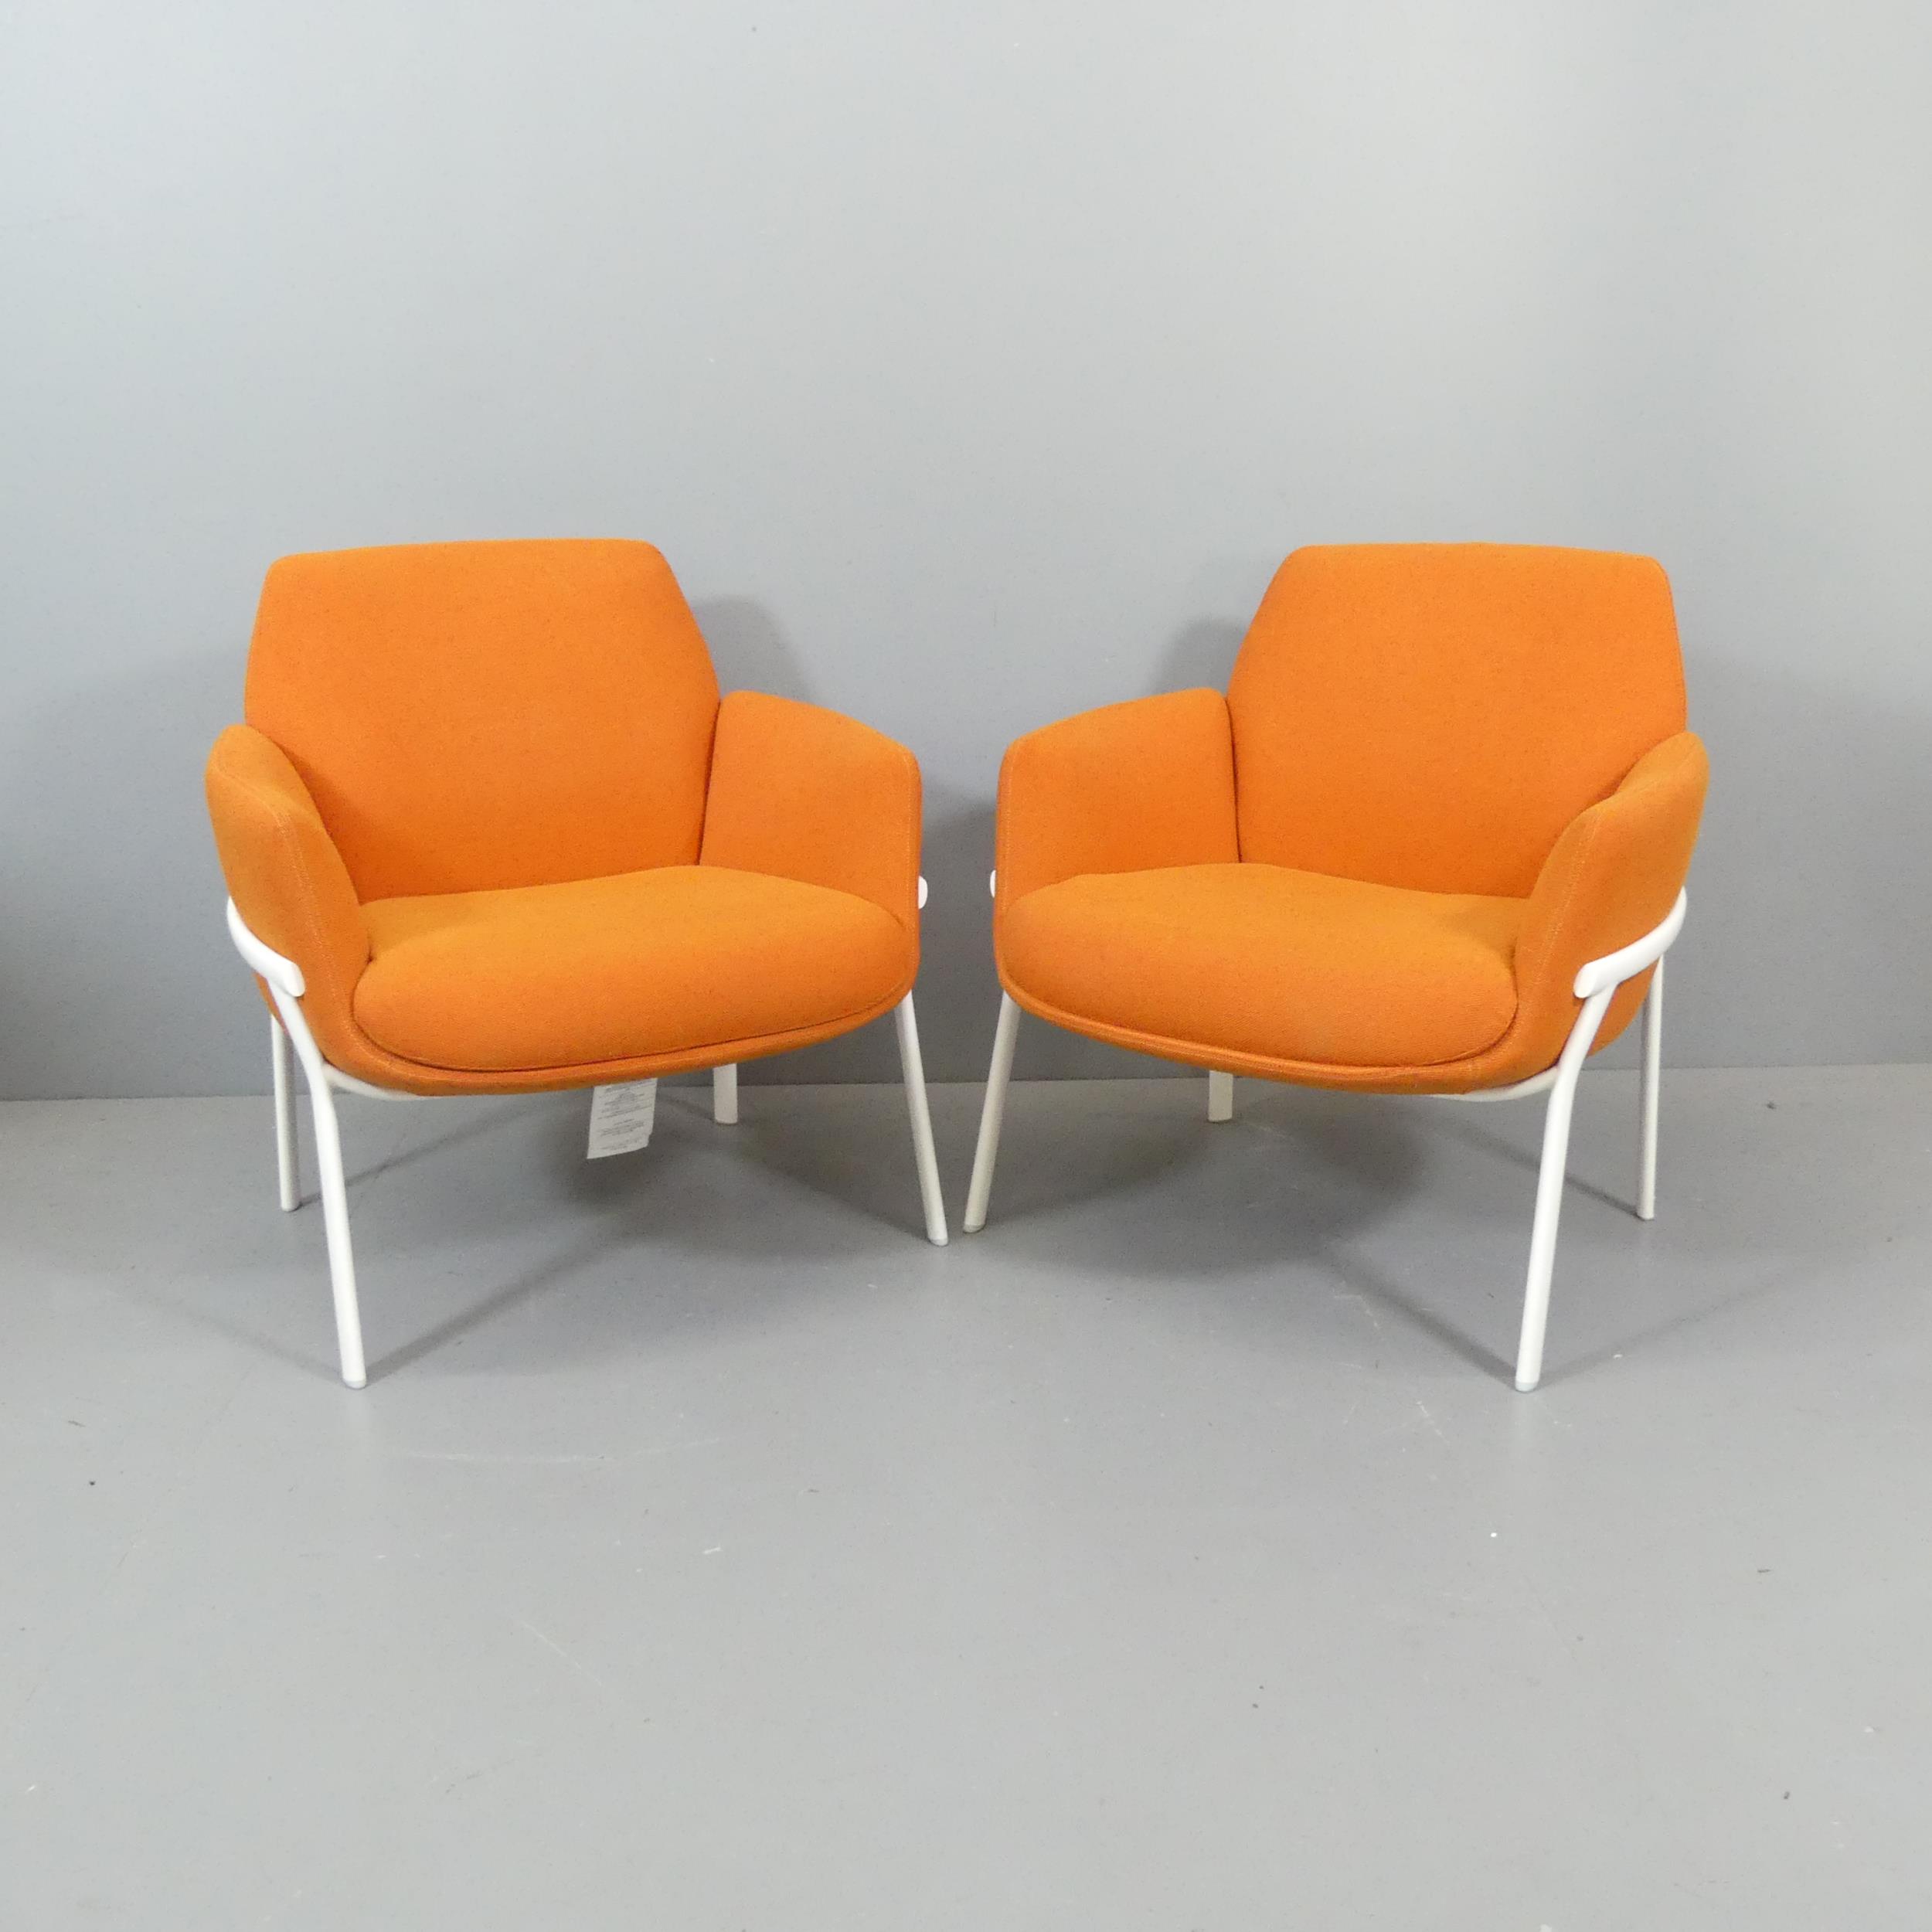 HAWORTH - A pair of contemporary Poppy armchairs by Patricia Urquiola, with maker’s label, current